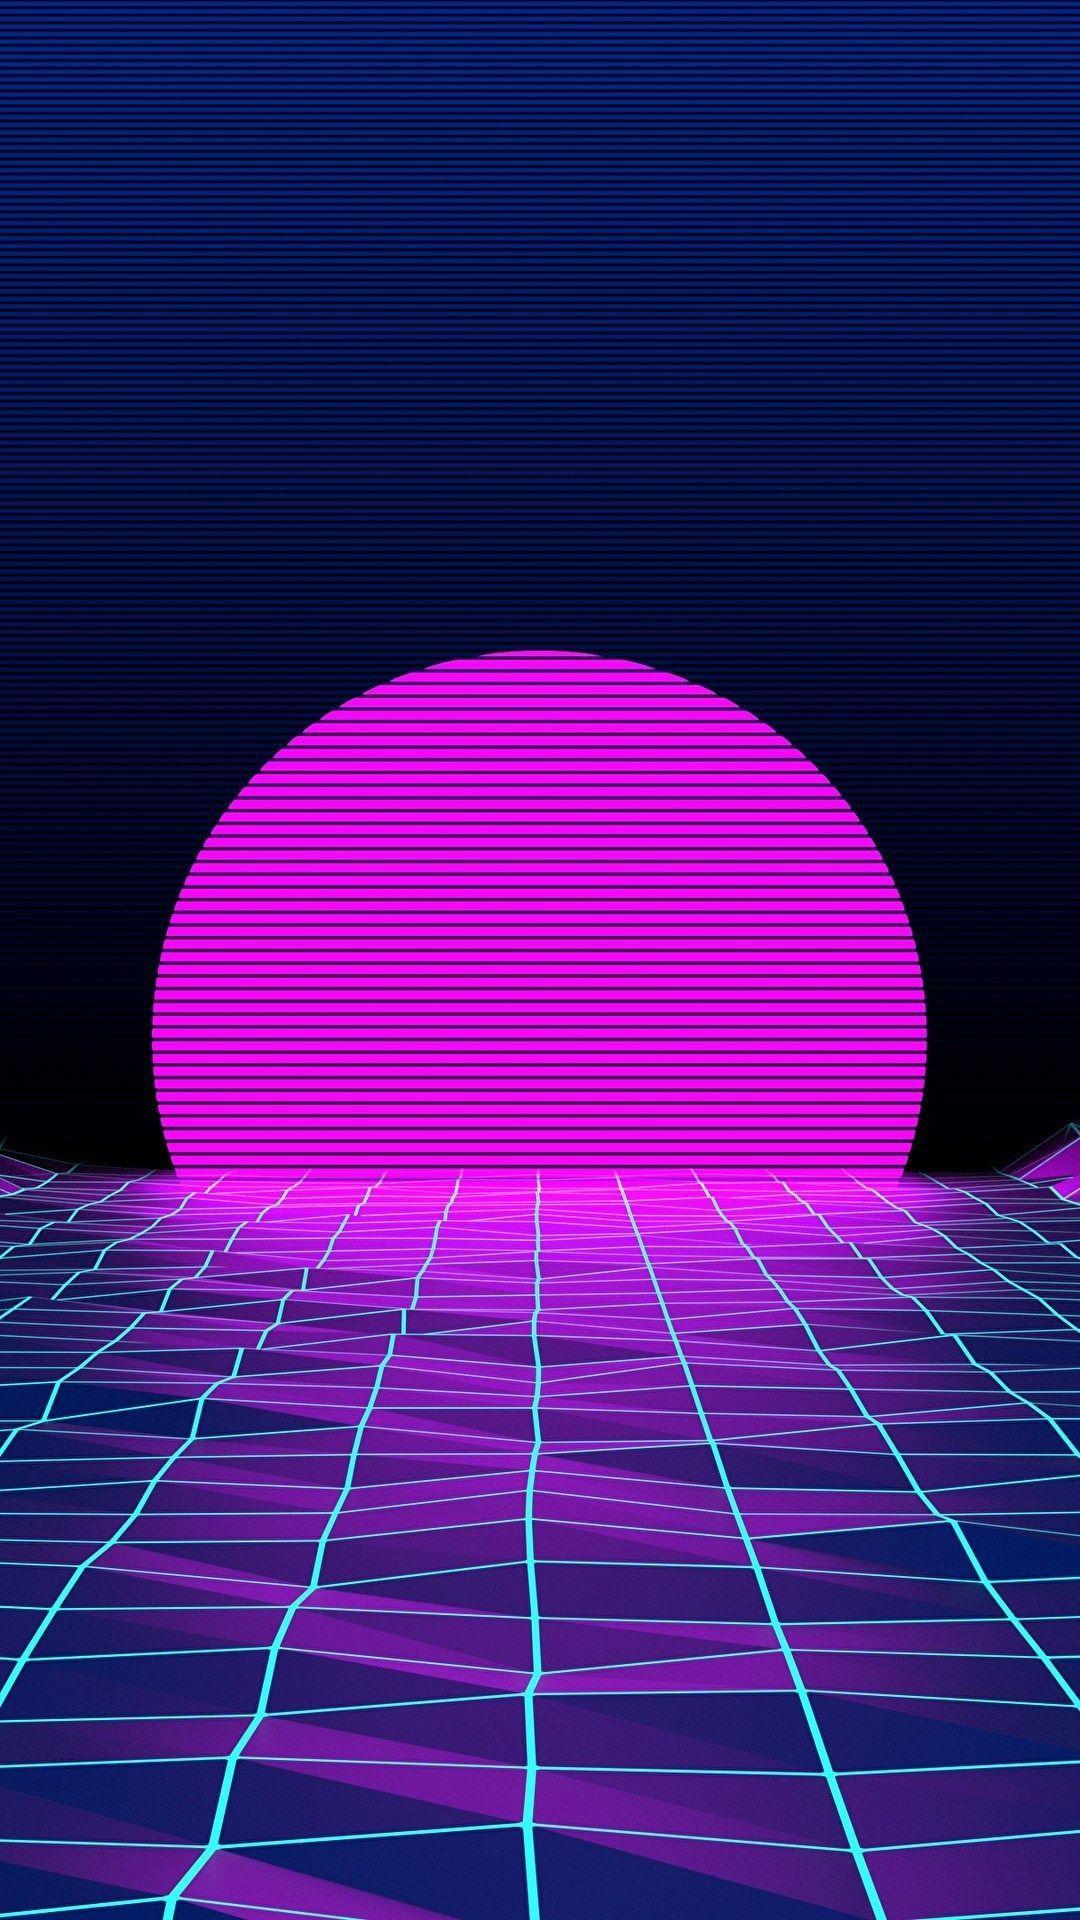 80s Aesthetic Wallpapers - Top Free 80s Aesthetic Backgrounds